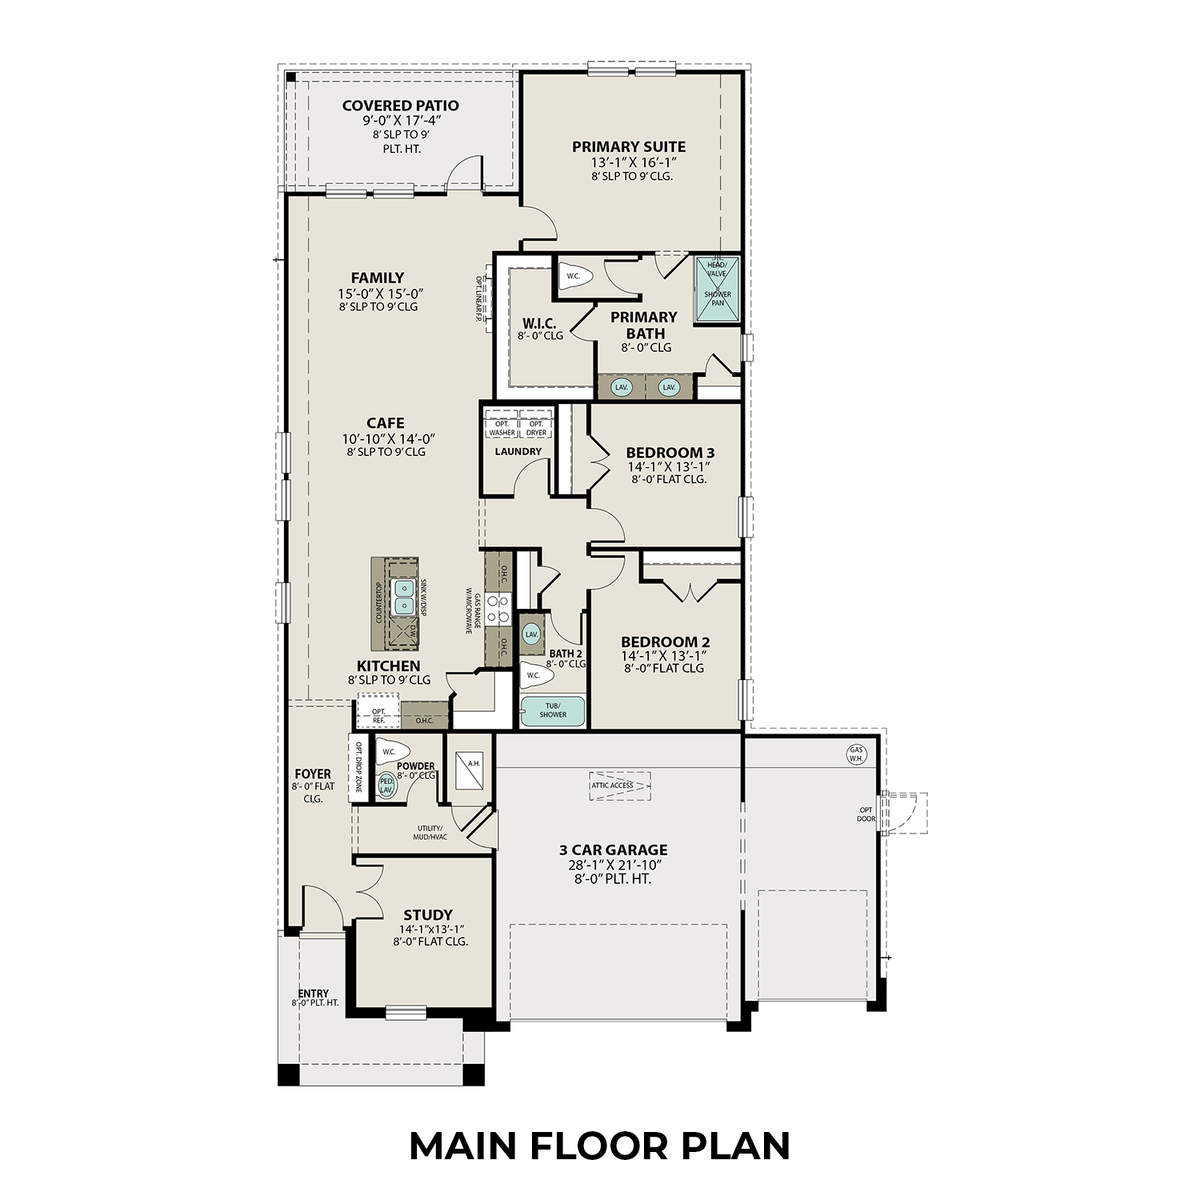 1 - The Riviera C with 3-Car Garage floor plan layout for 27 Wichita Trail in Davidson Homes' River Ranch Meadows community.